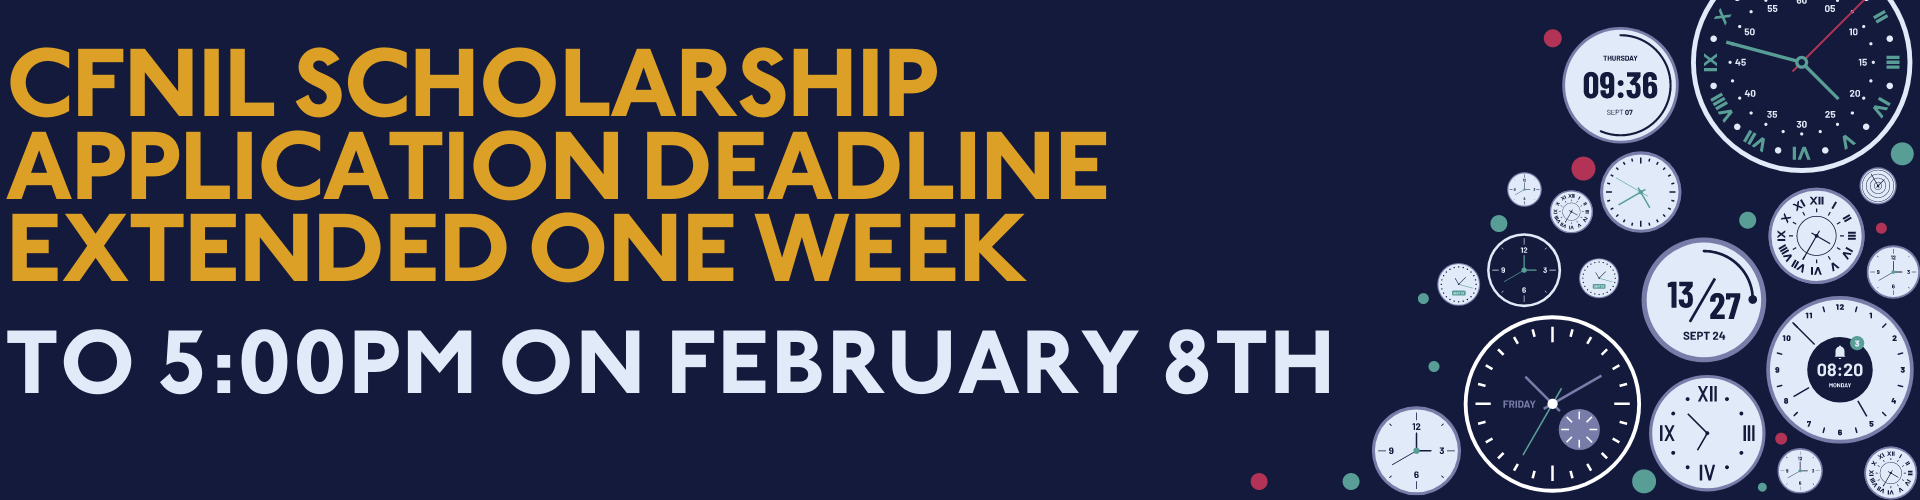 CFNIL Scholarship Application deadline extended one week to 5:00pm on February 8th